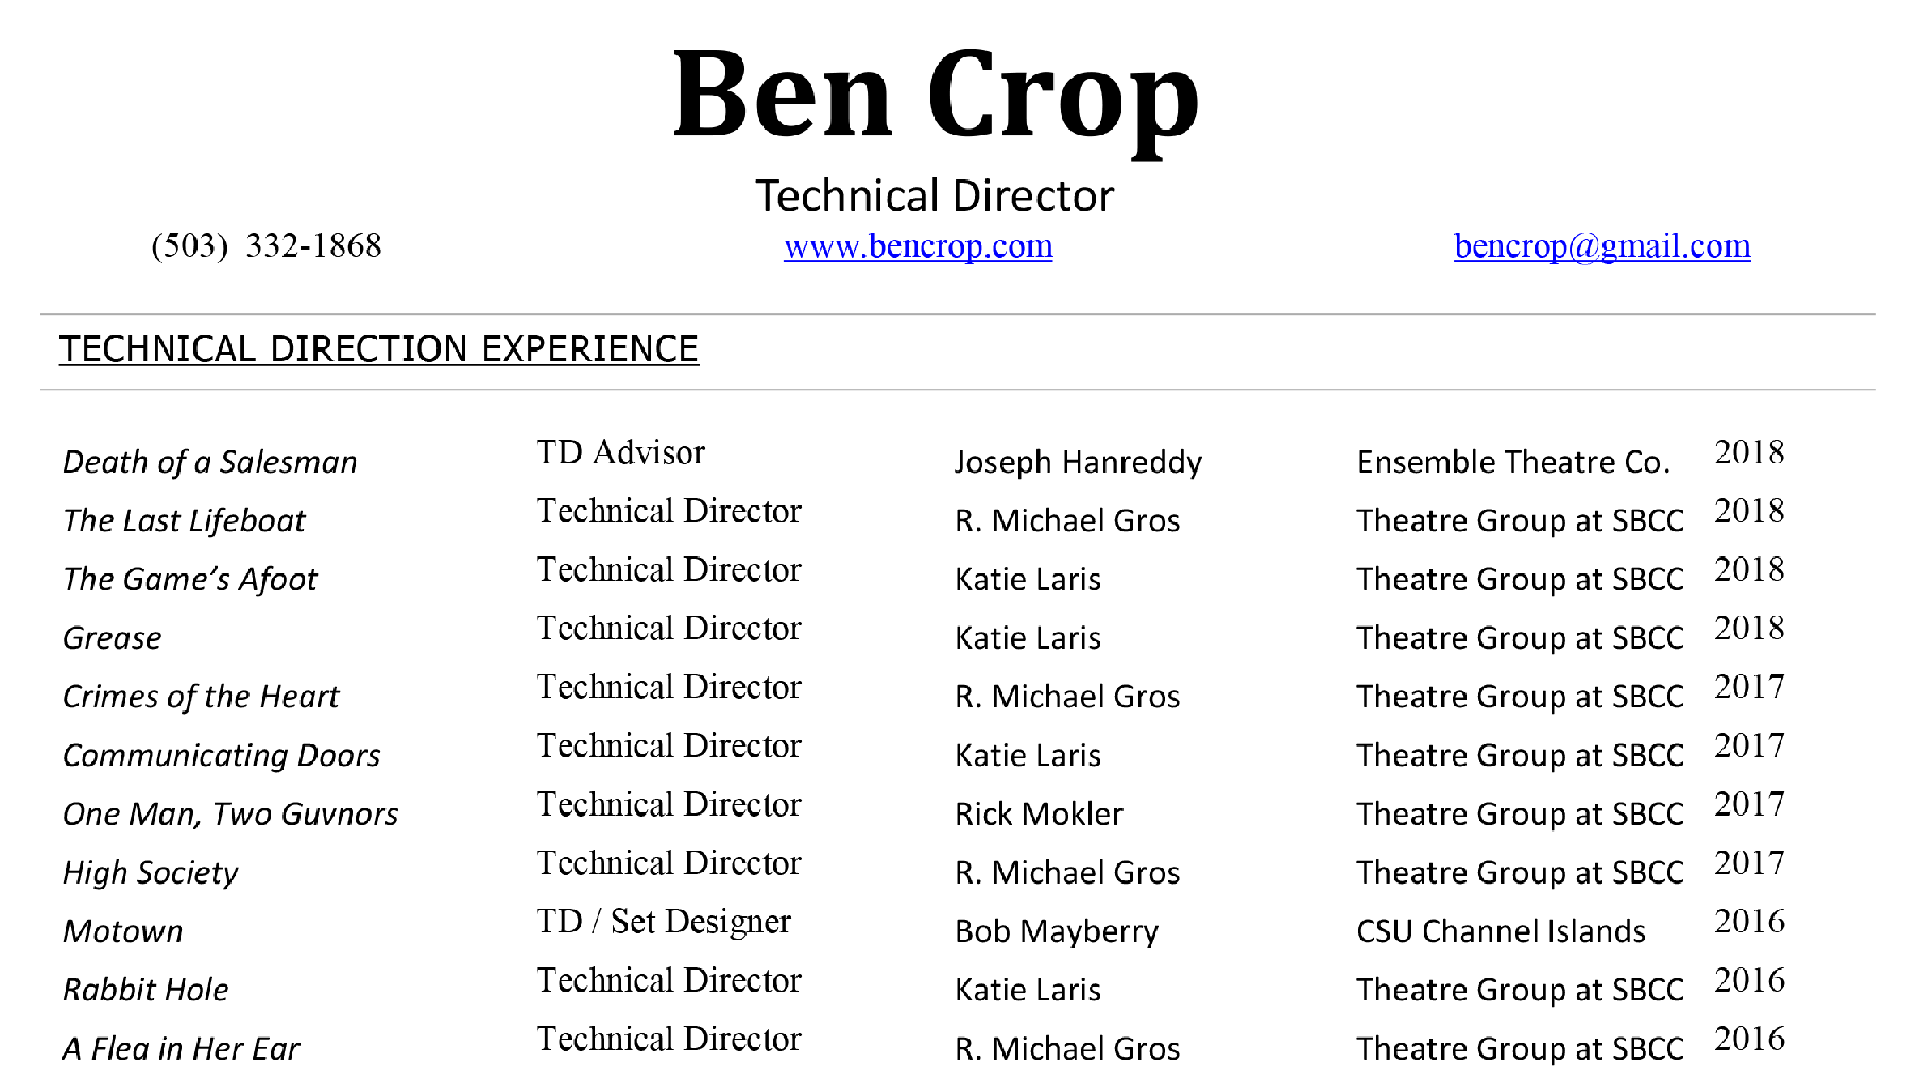 Technical Direction Resume